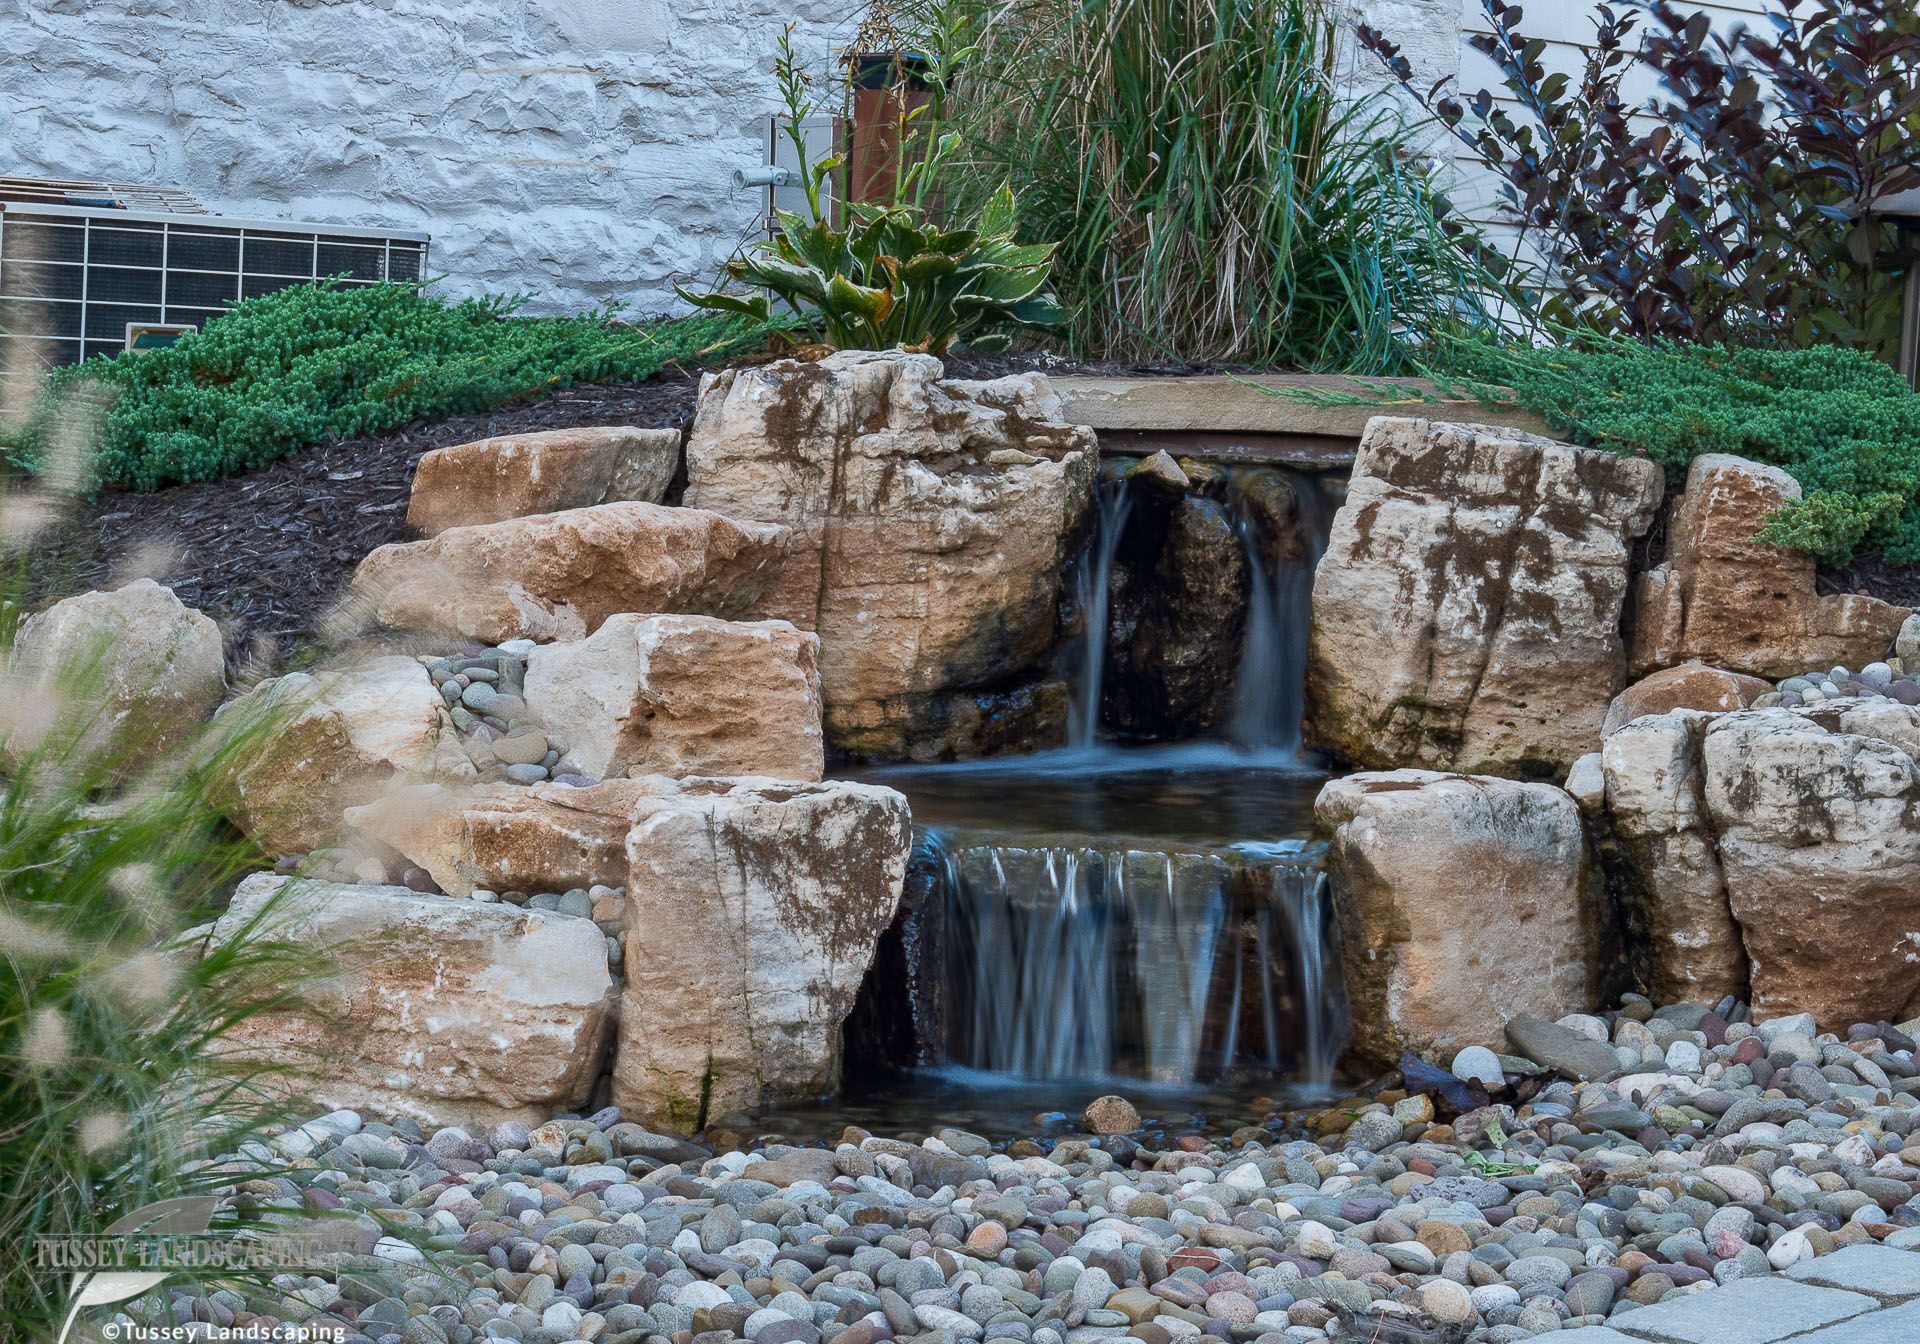 A small waterfall in a backyard with rocks and plants.